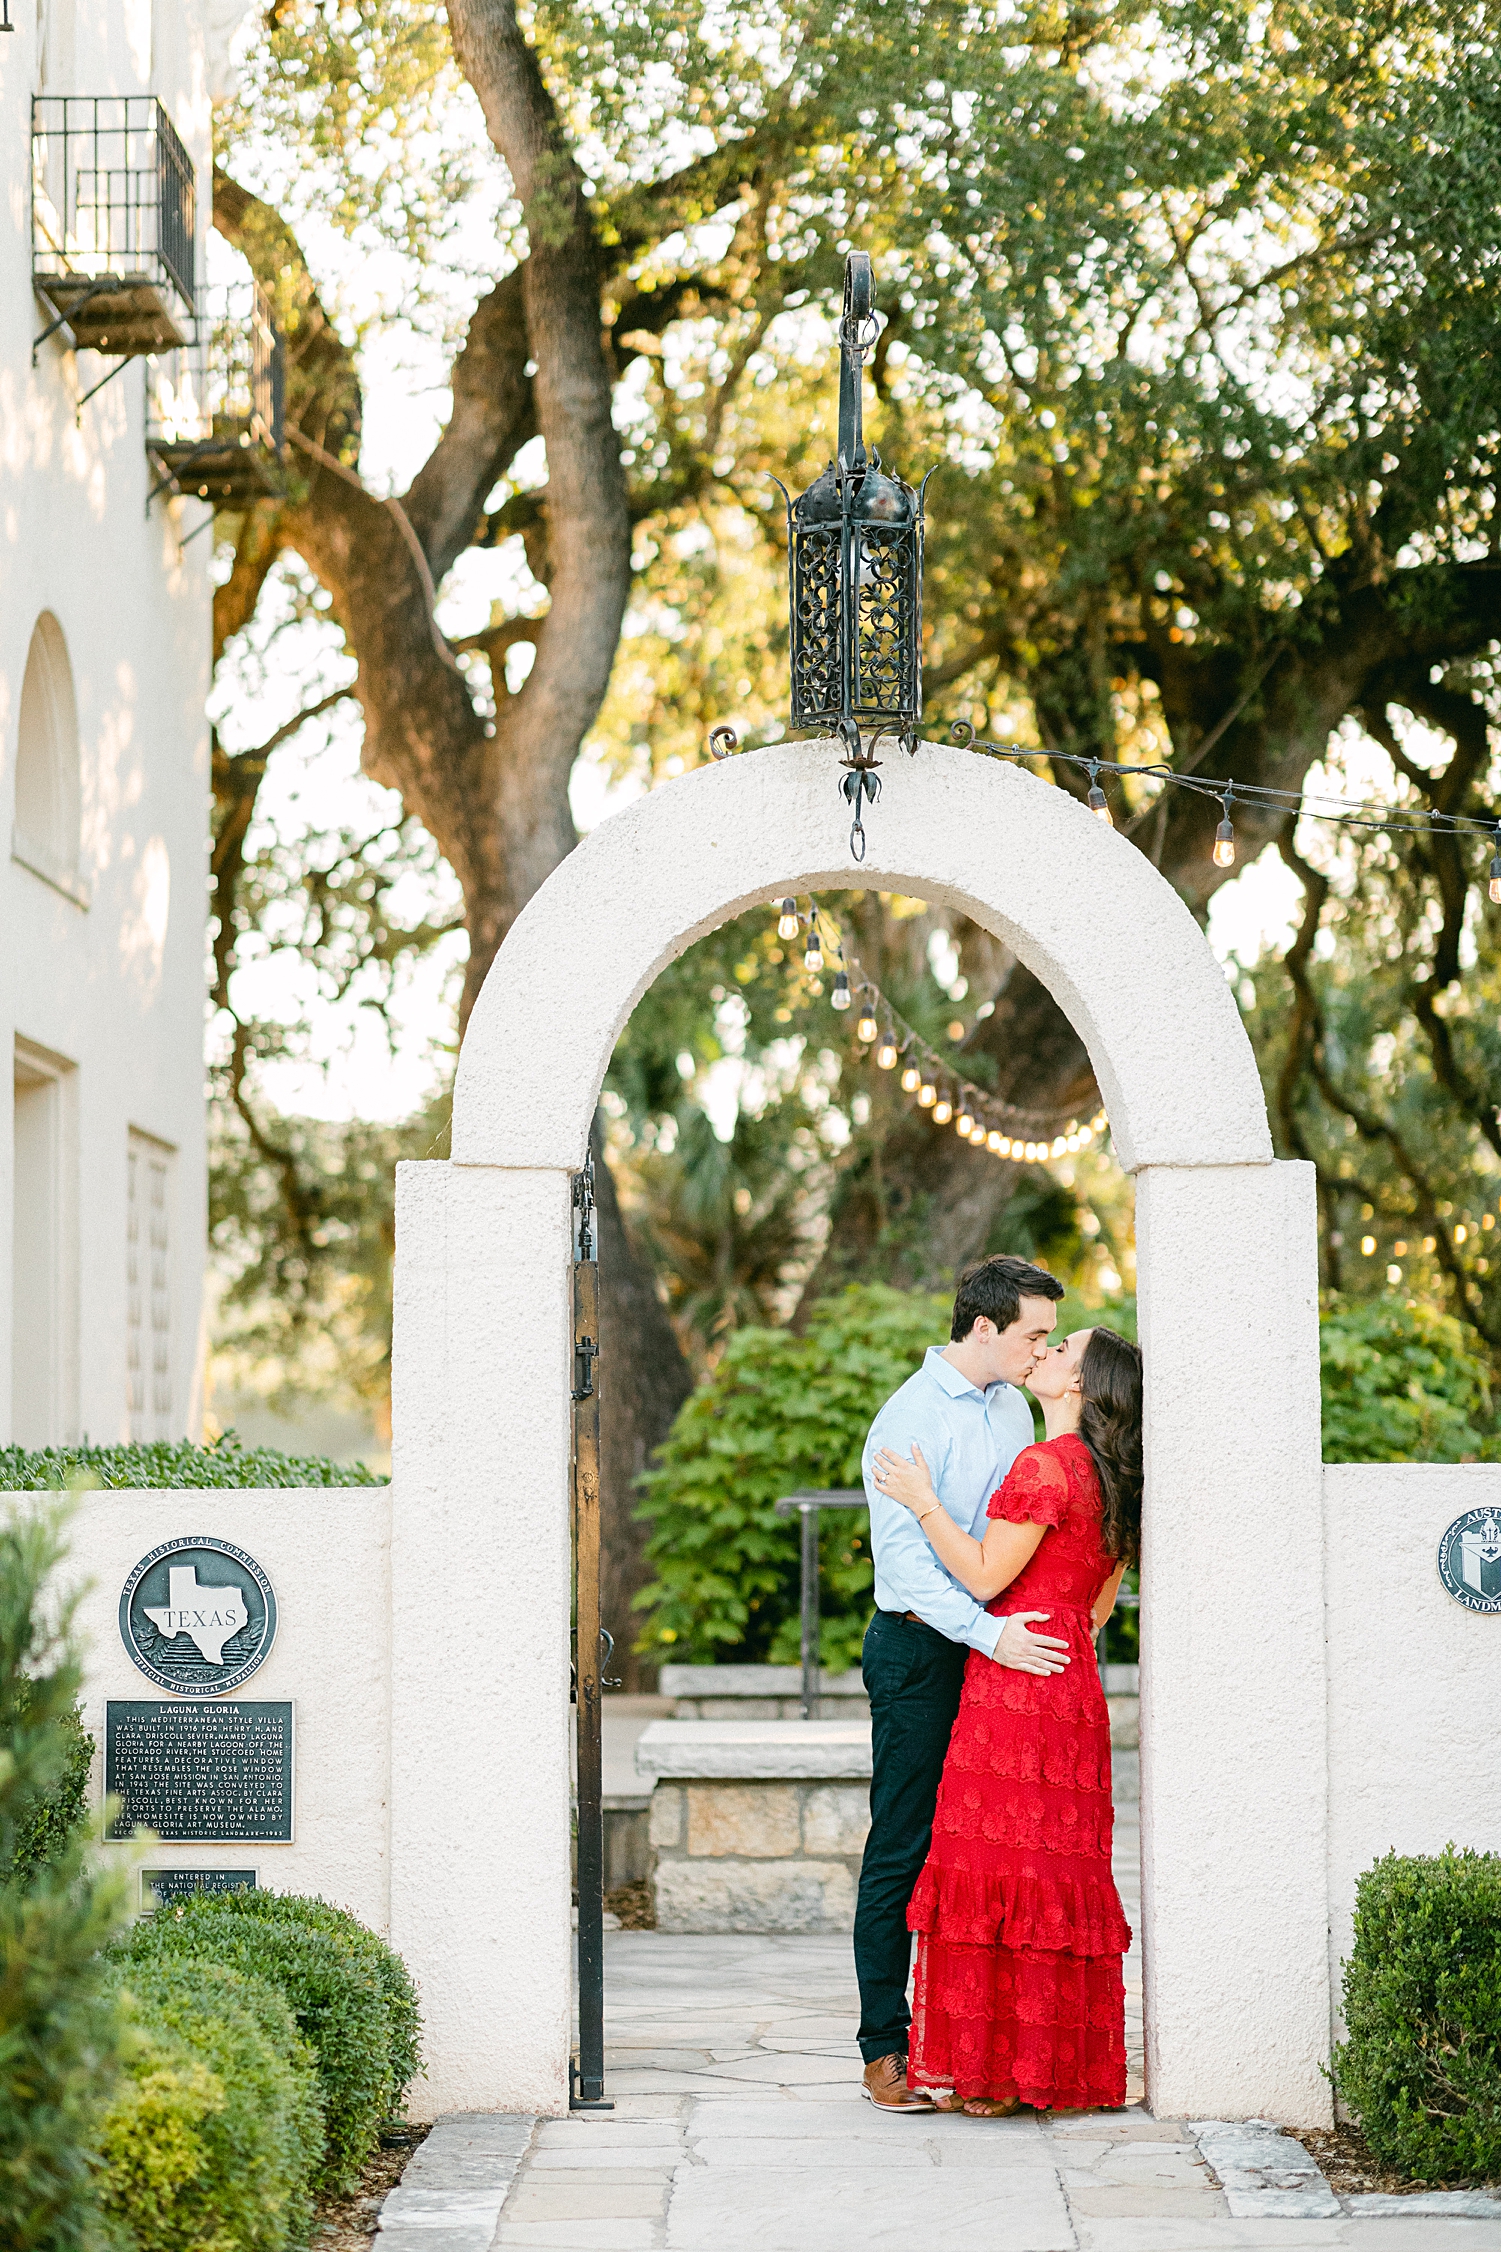 Man and woman in red dress kissing under archway Austin engagement at Laguna Gloria